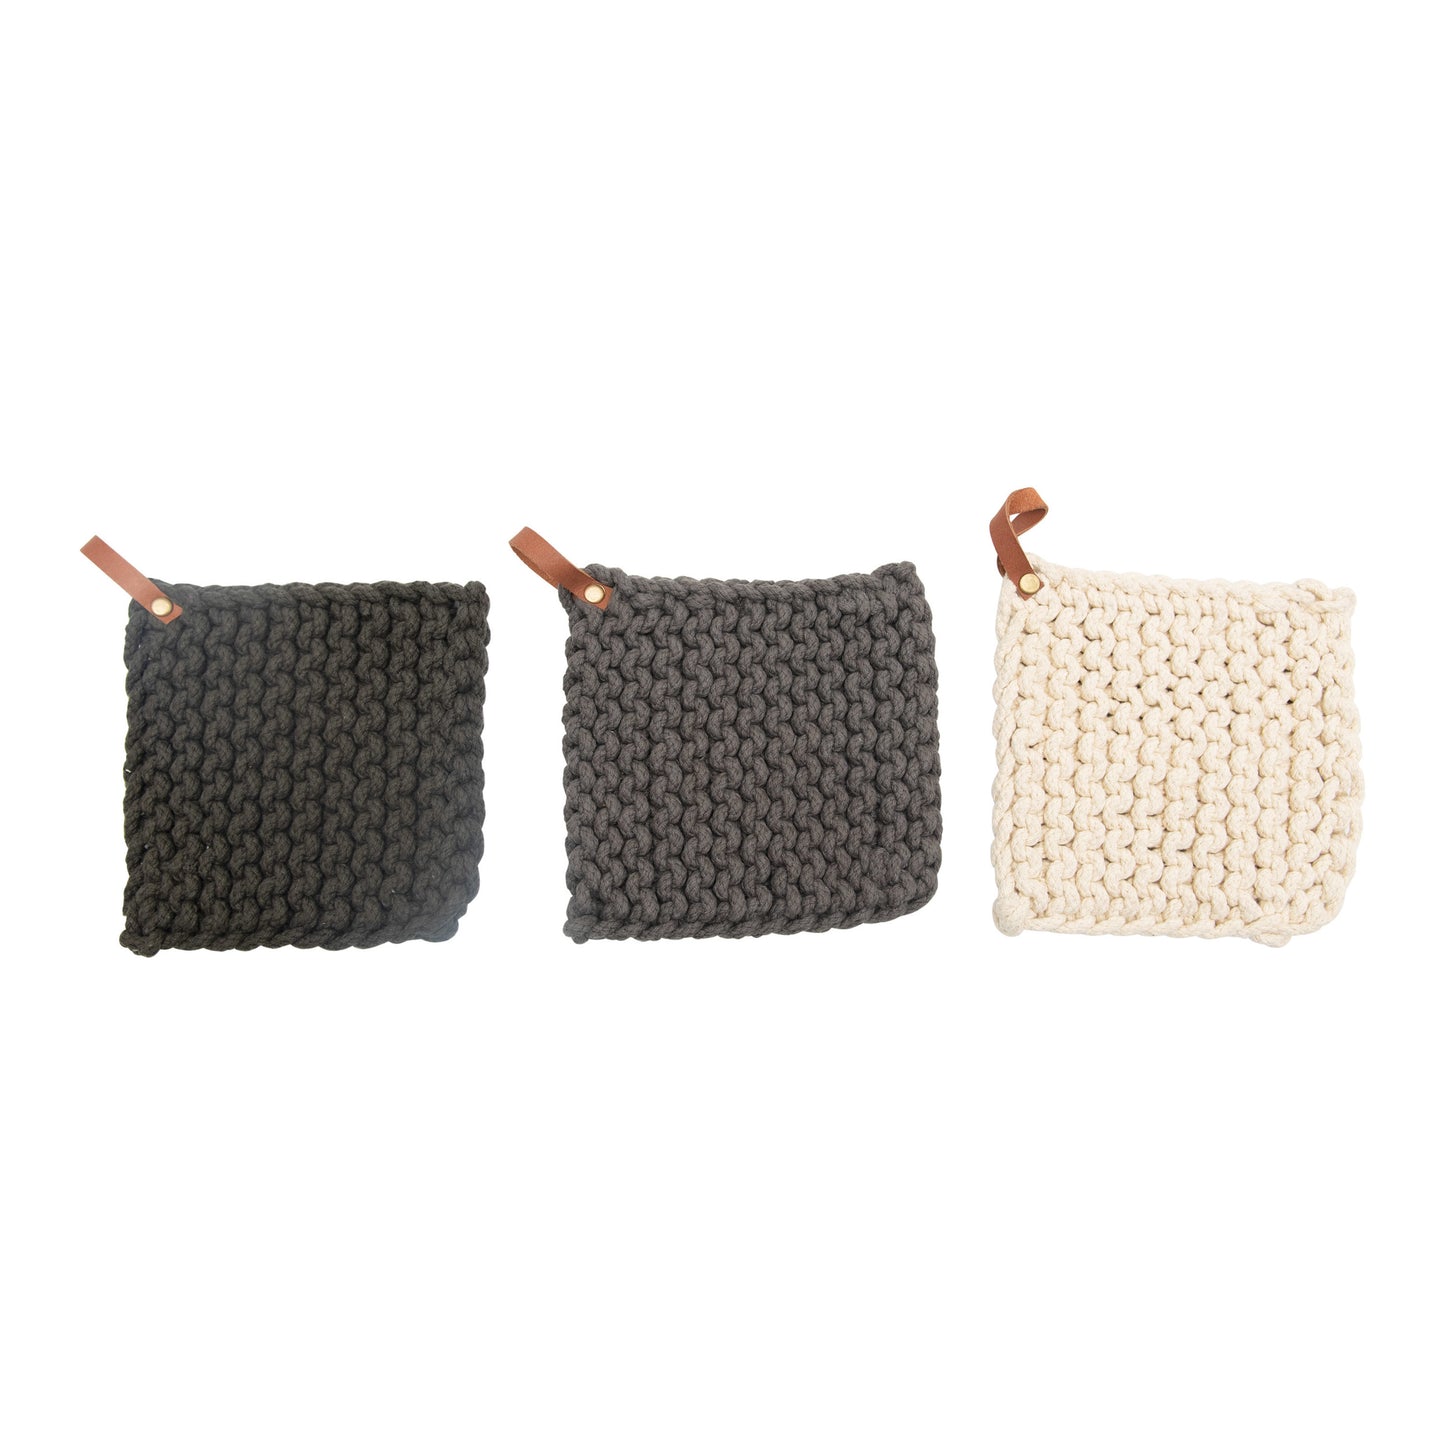 Cotton Crochet Potholder with Leather Loop